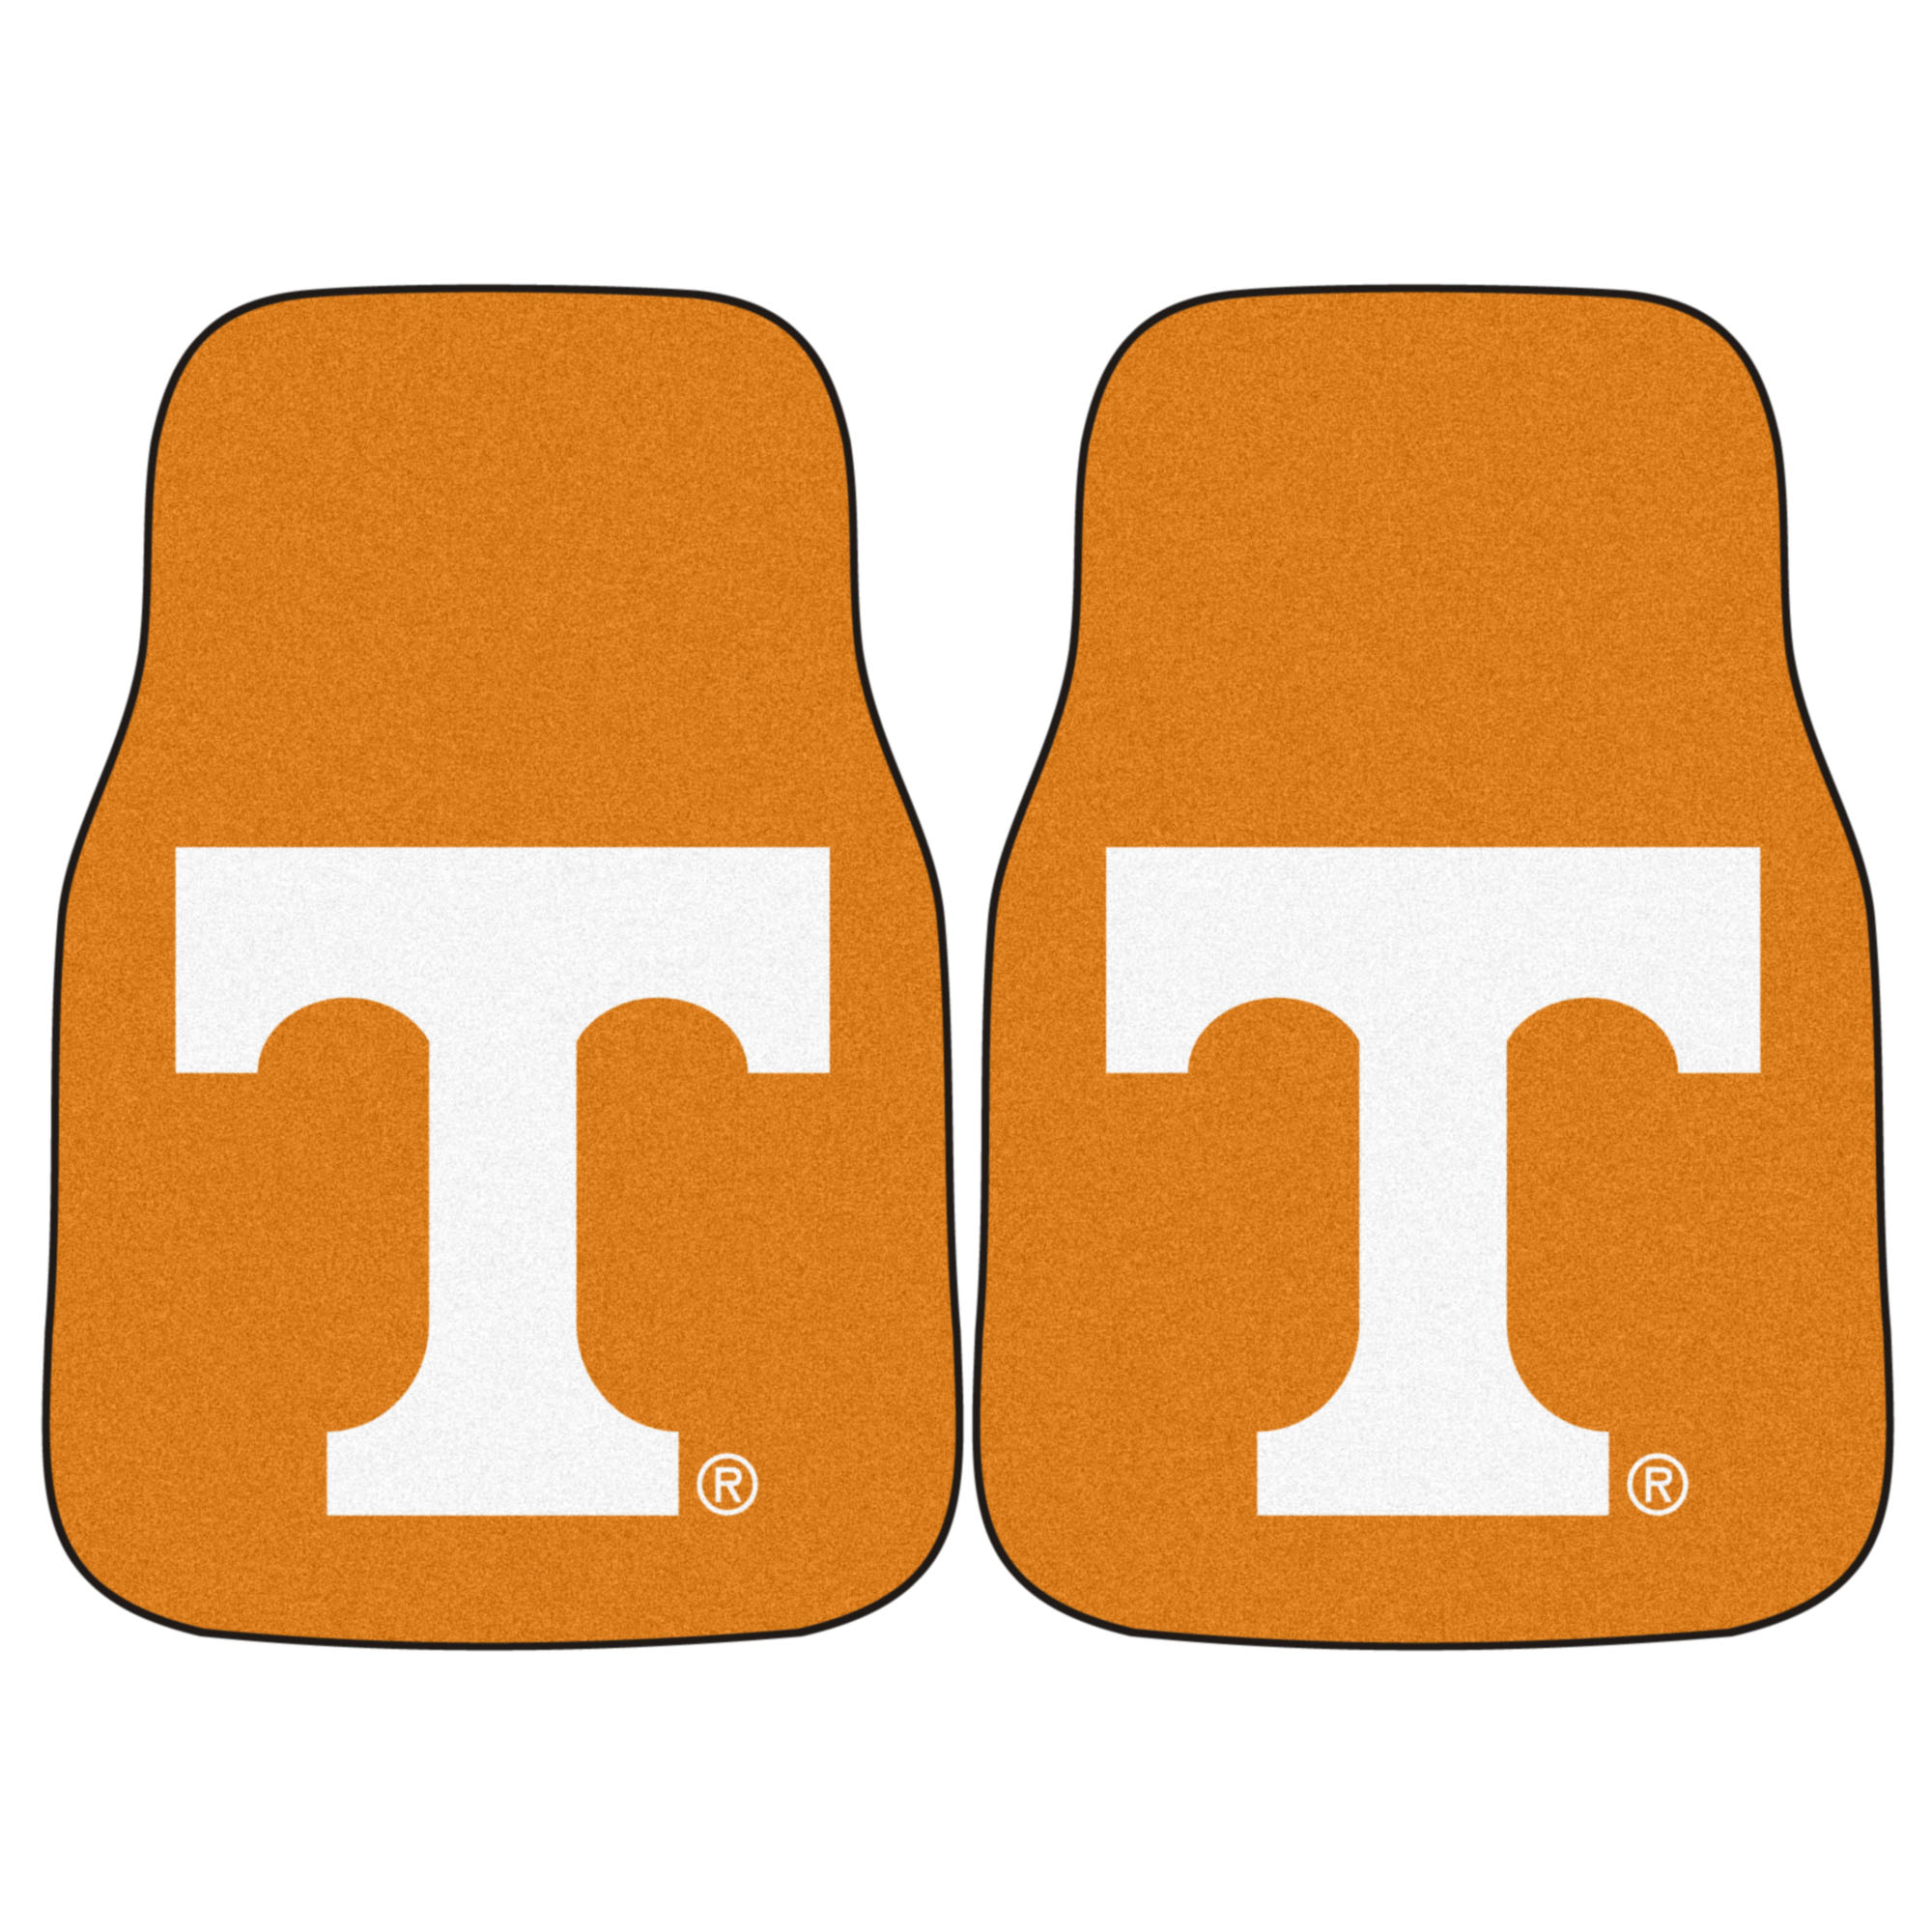 NCAA University of Tennessee Volunteers 2-PC Set of Front Carpet Car Mats, Universal Size